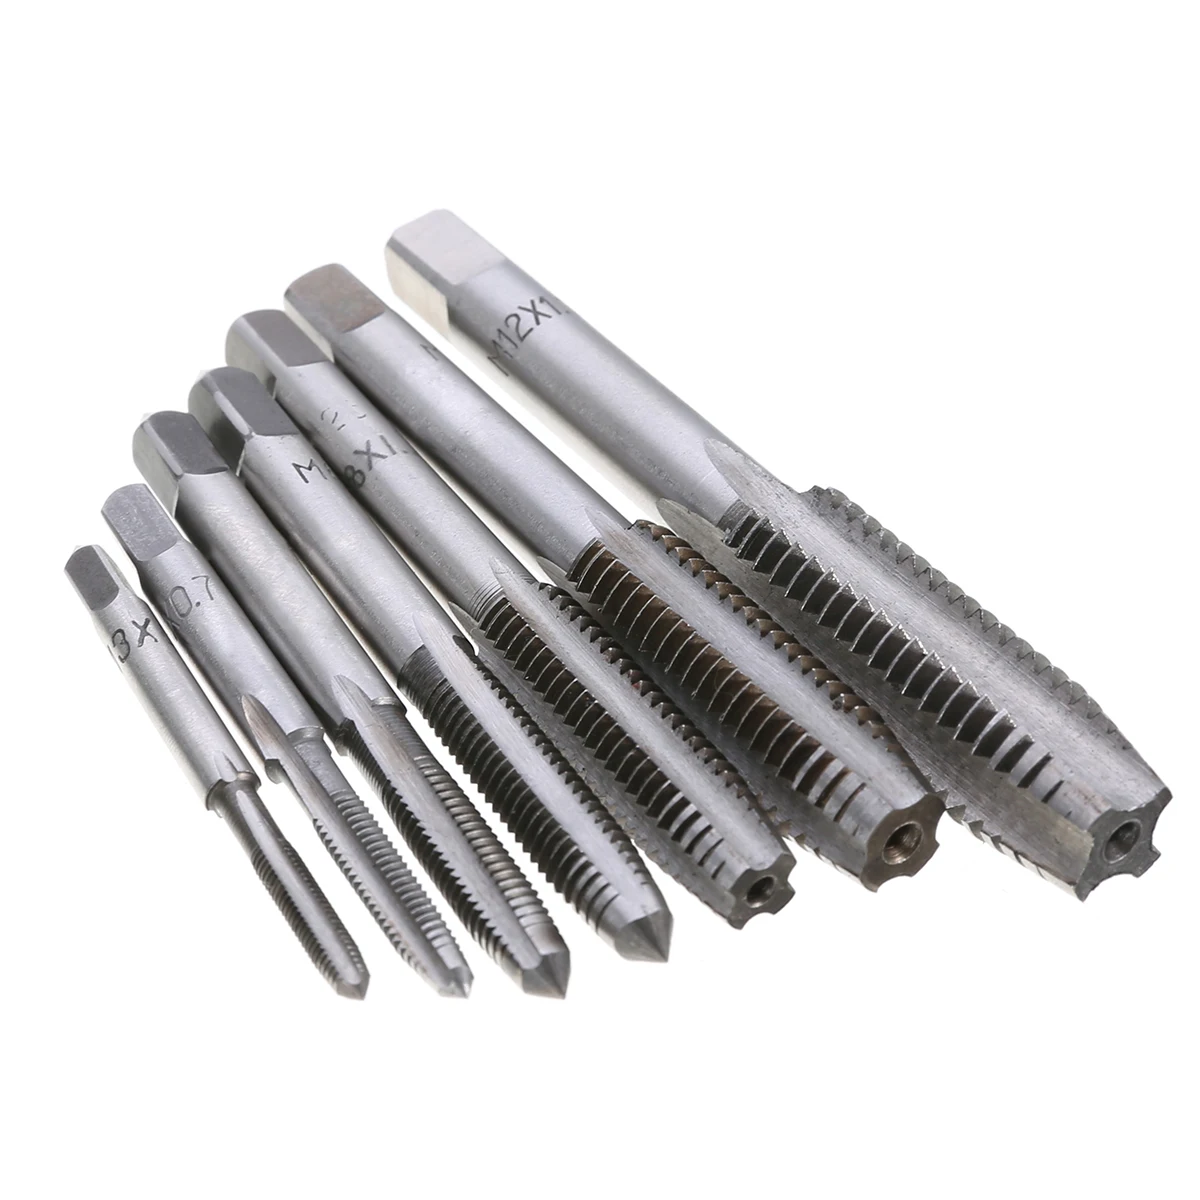 LF&LQEW 7pcs/Set M3-M12 HSS Metric Tapper Right Hand Thread Tap Tool 0.5mm-1.75mm Pitch for Home Tools 